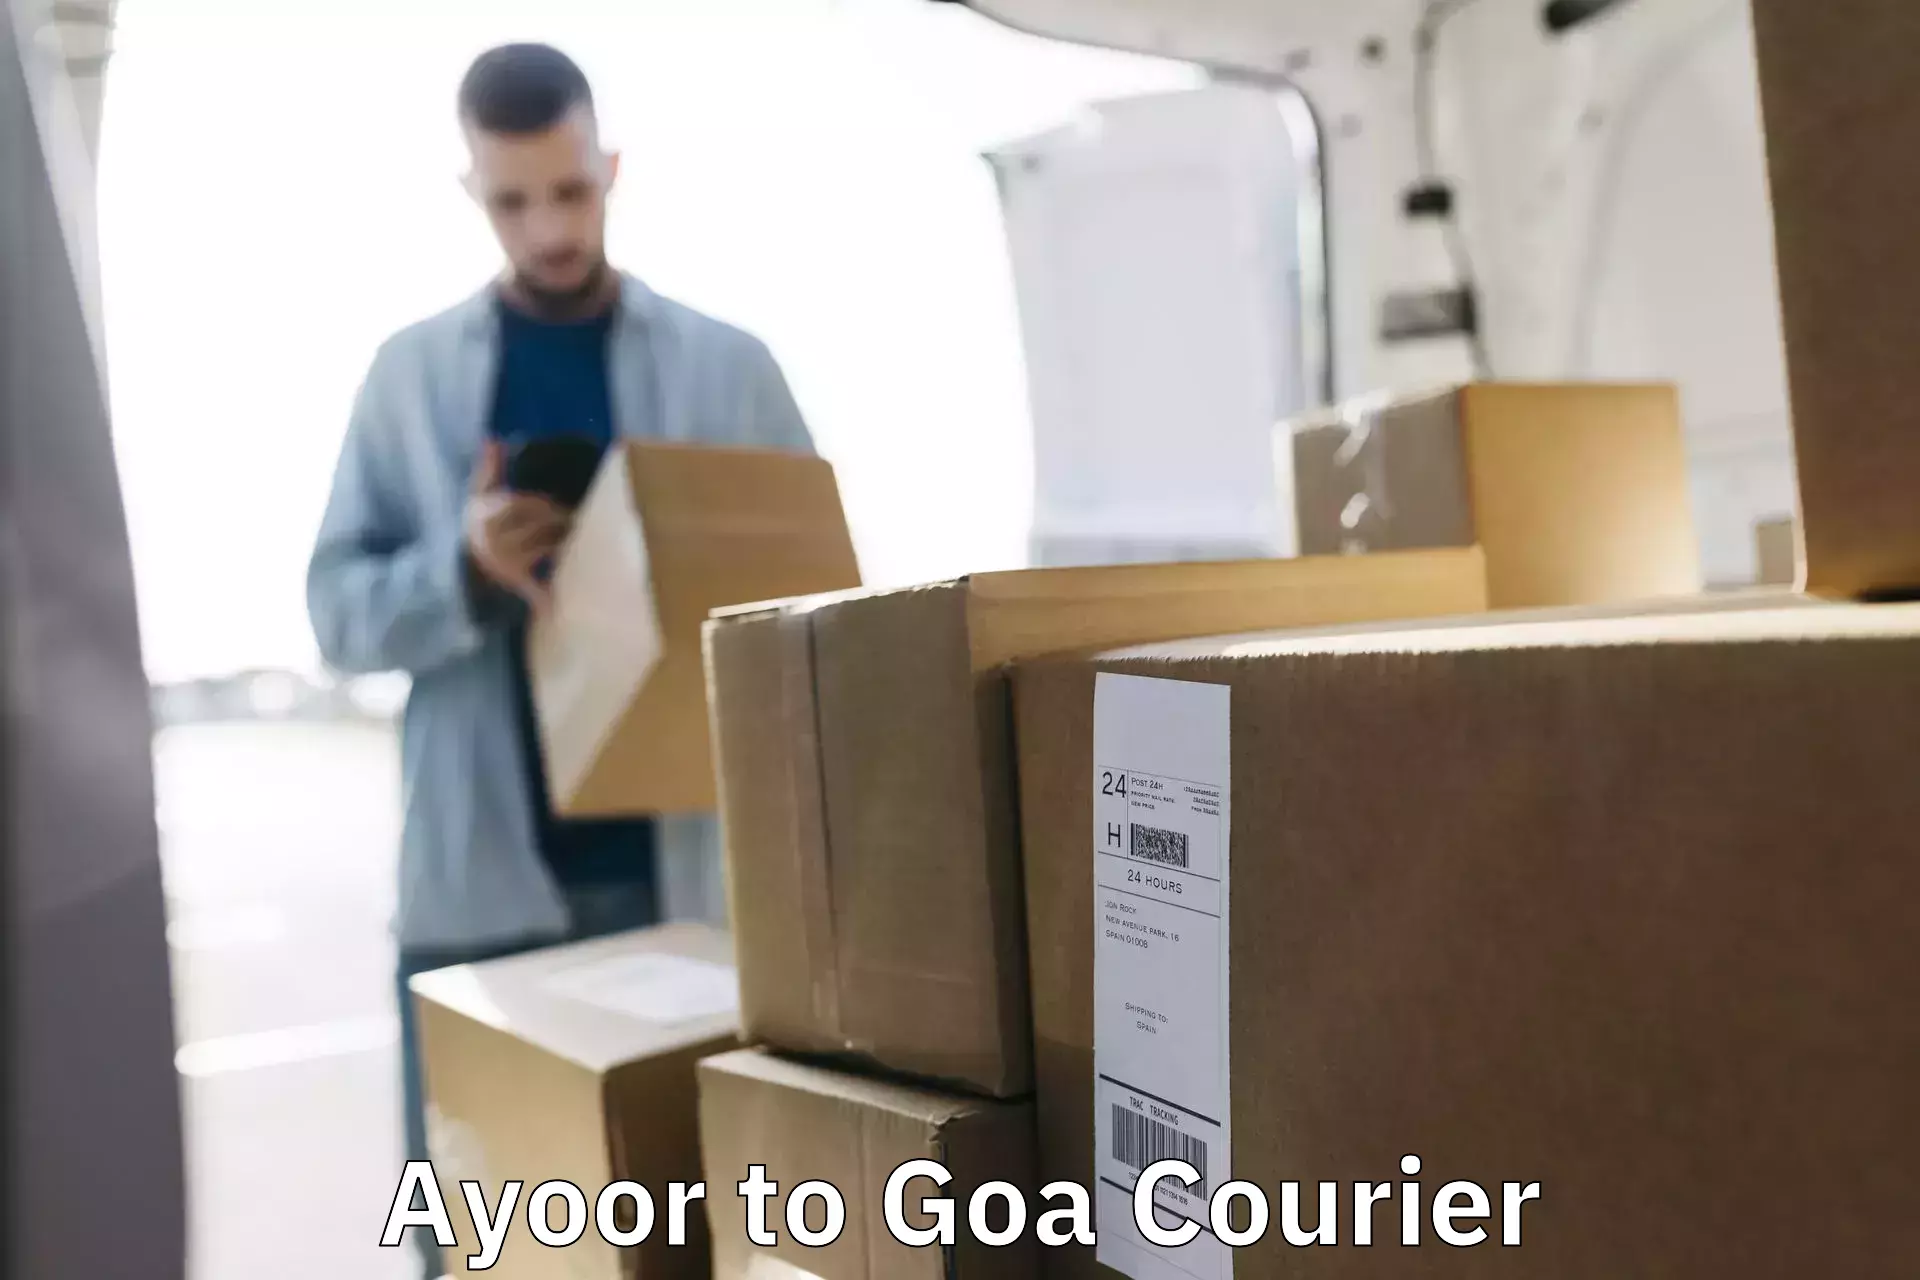 Advanced shipping network Ayoor to Goa